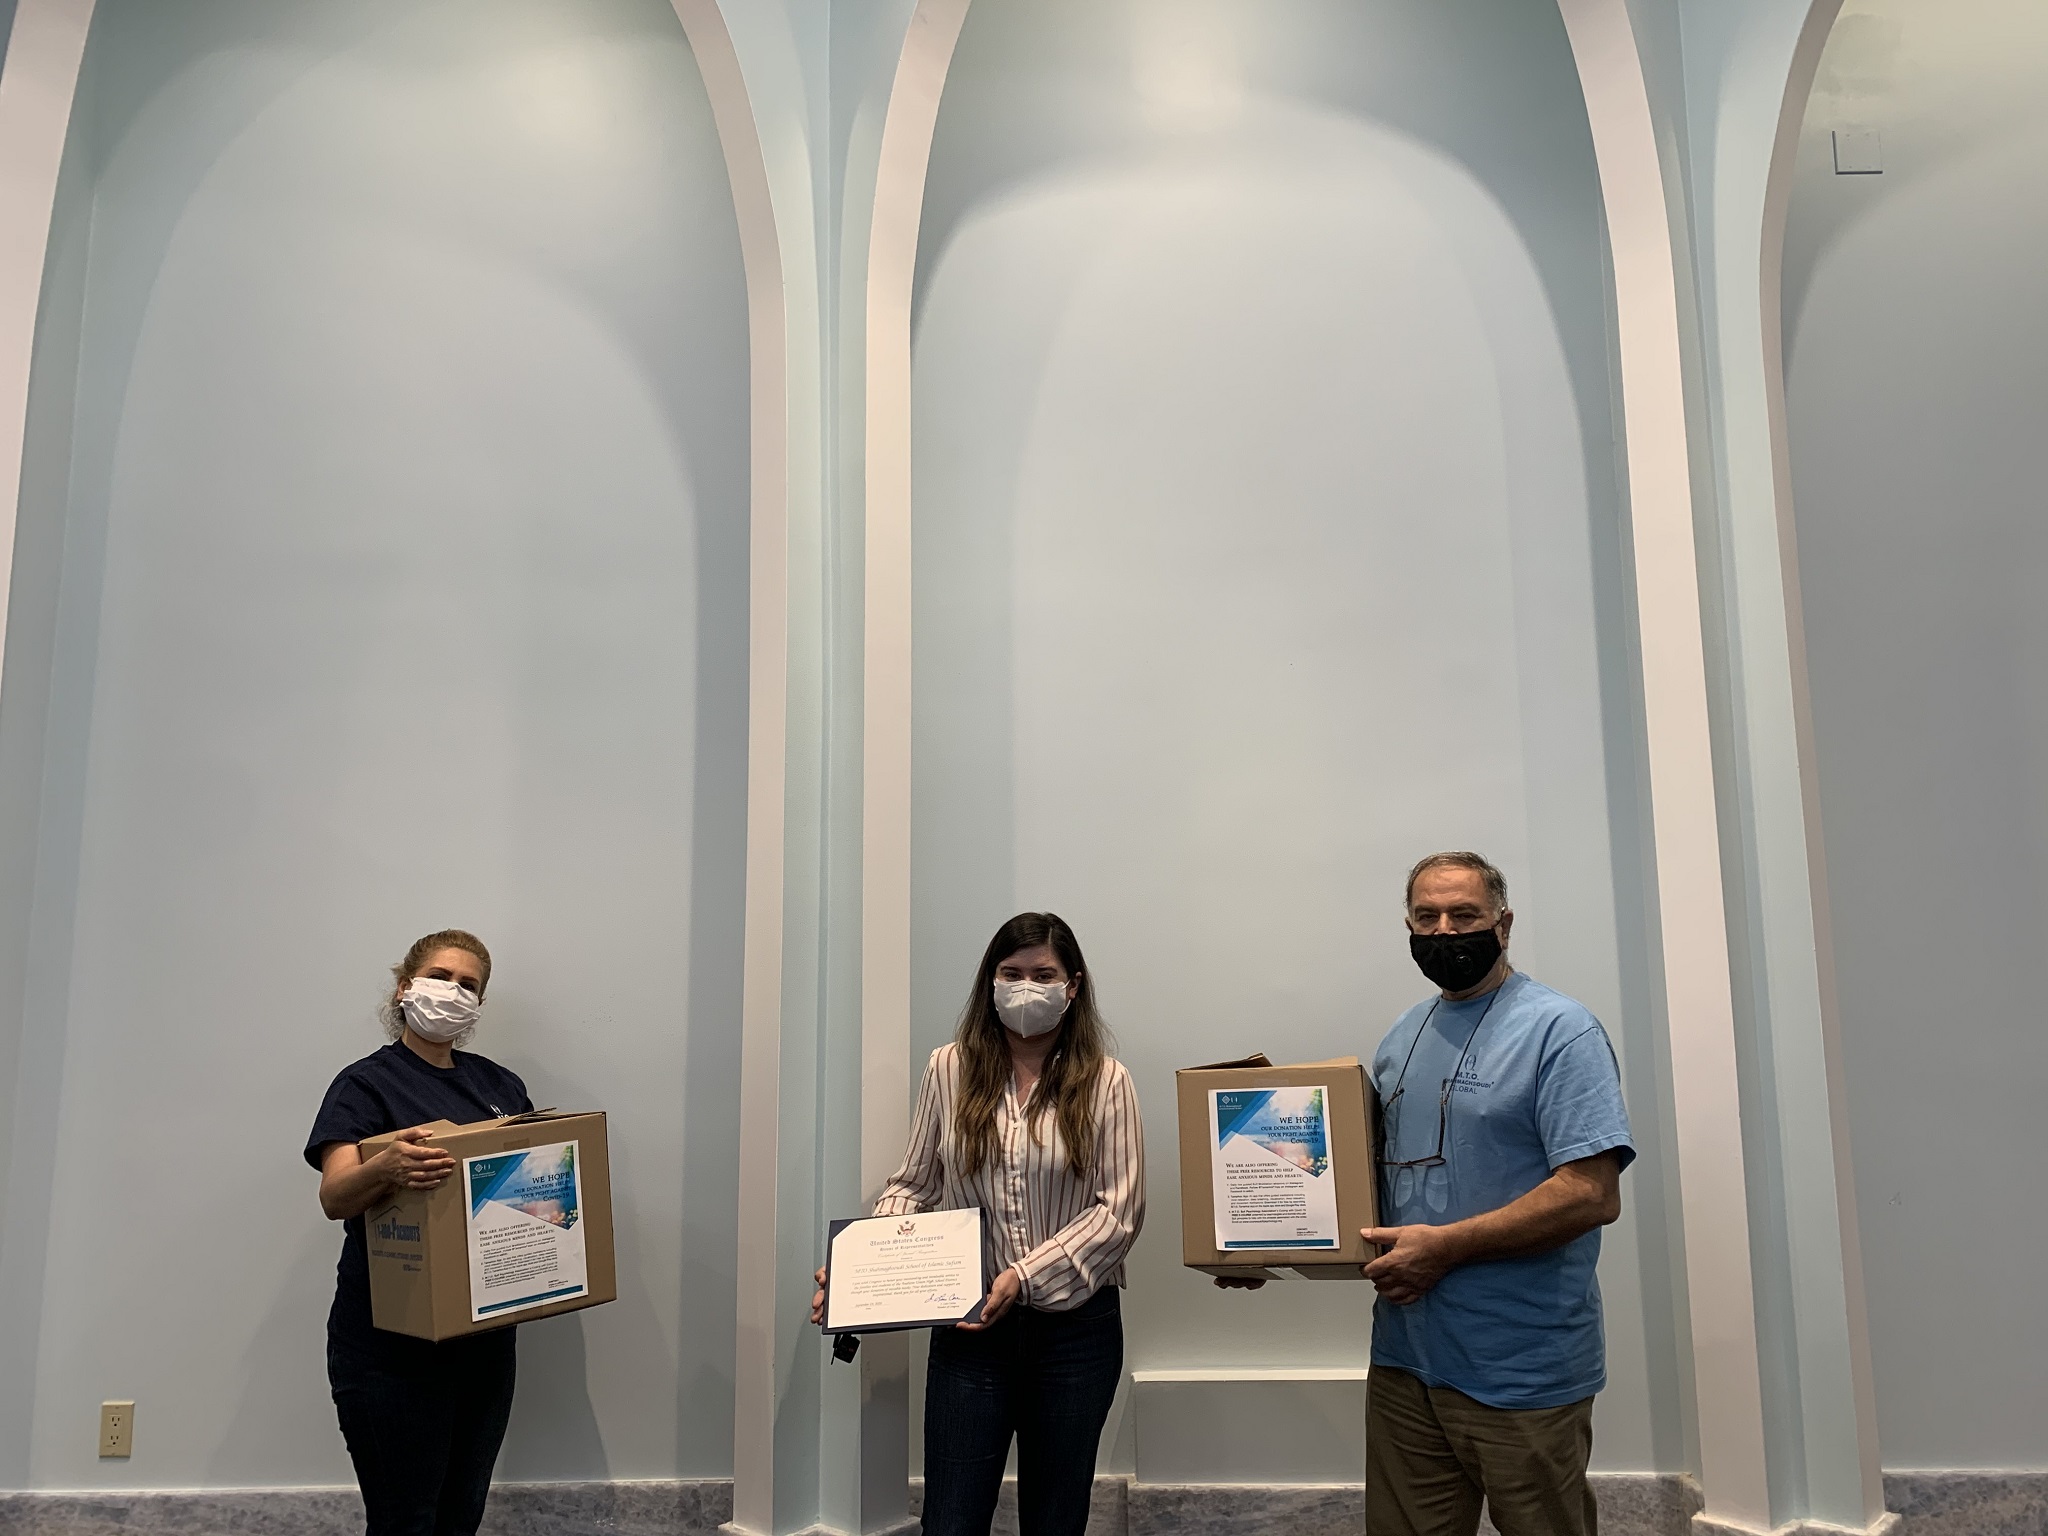 Congressman Correa's Office Requests M.T.O. Orange County Donation of 500 Hand Sewn Masks to Anaheim Union High School